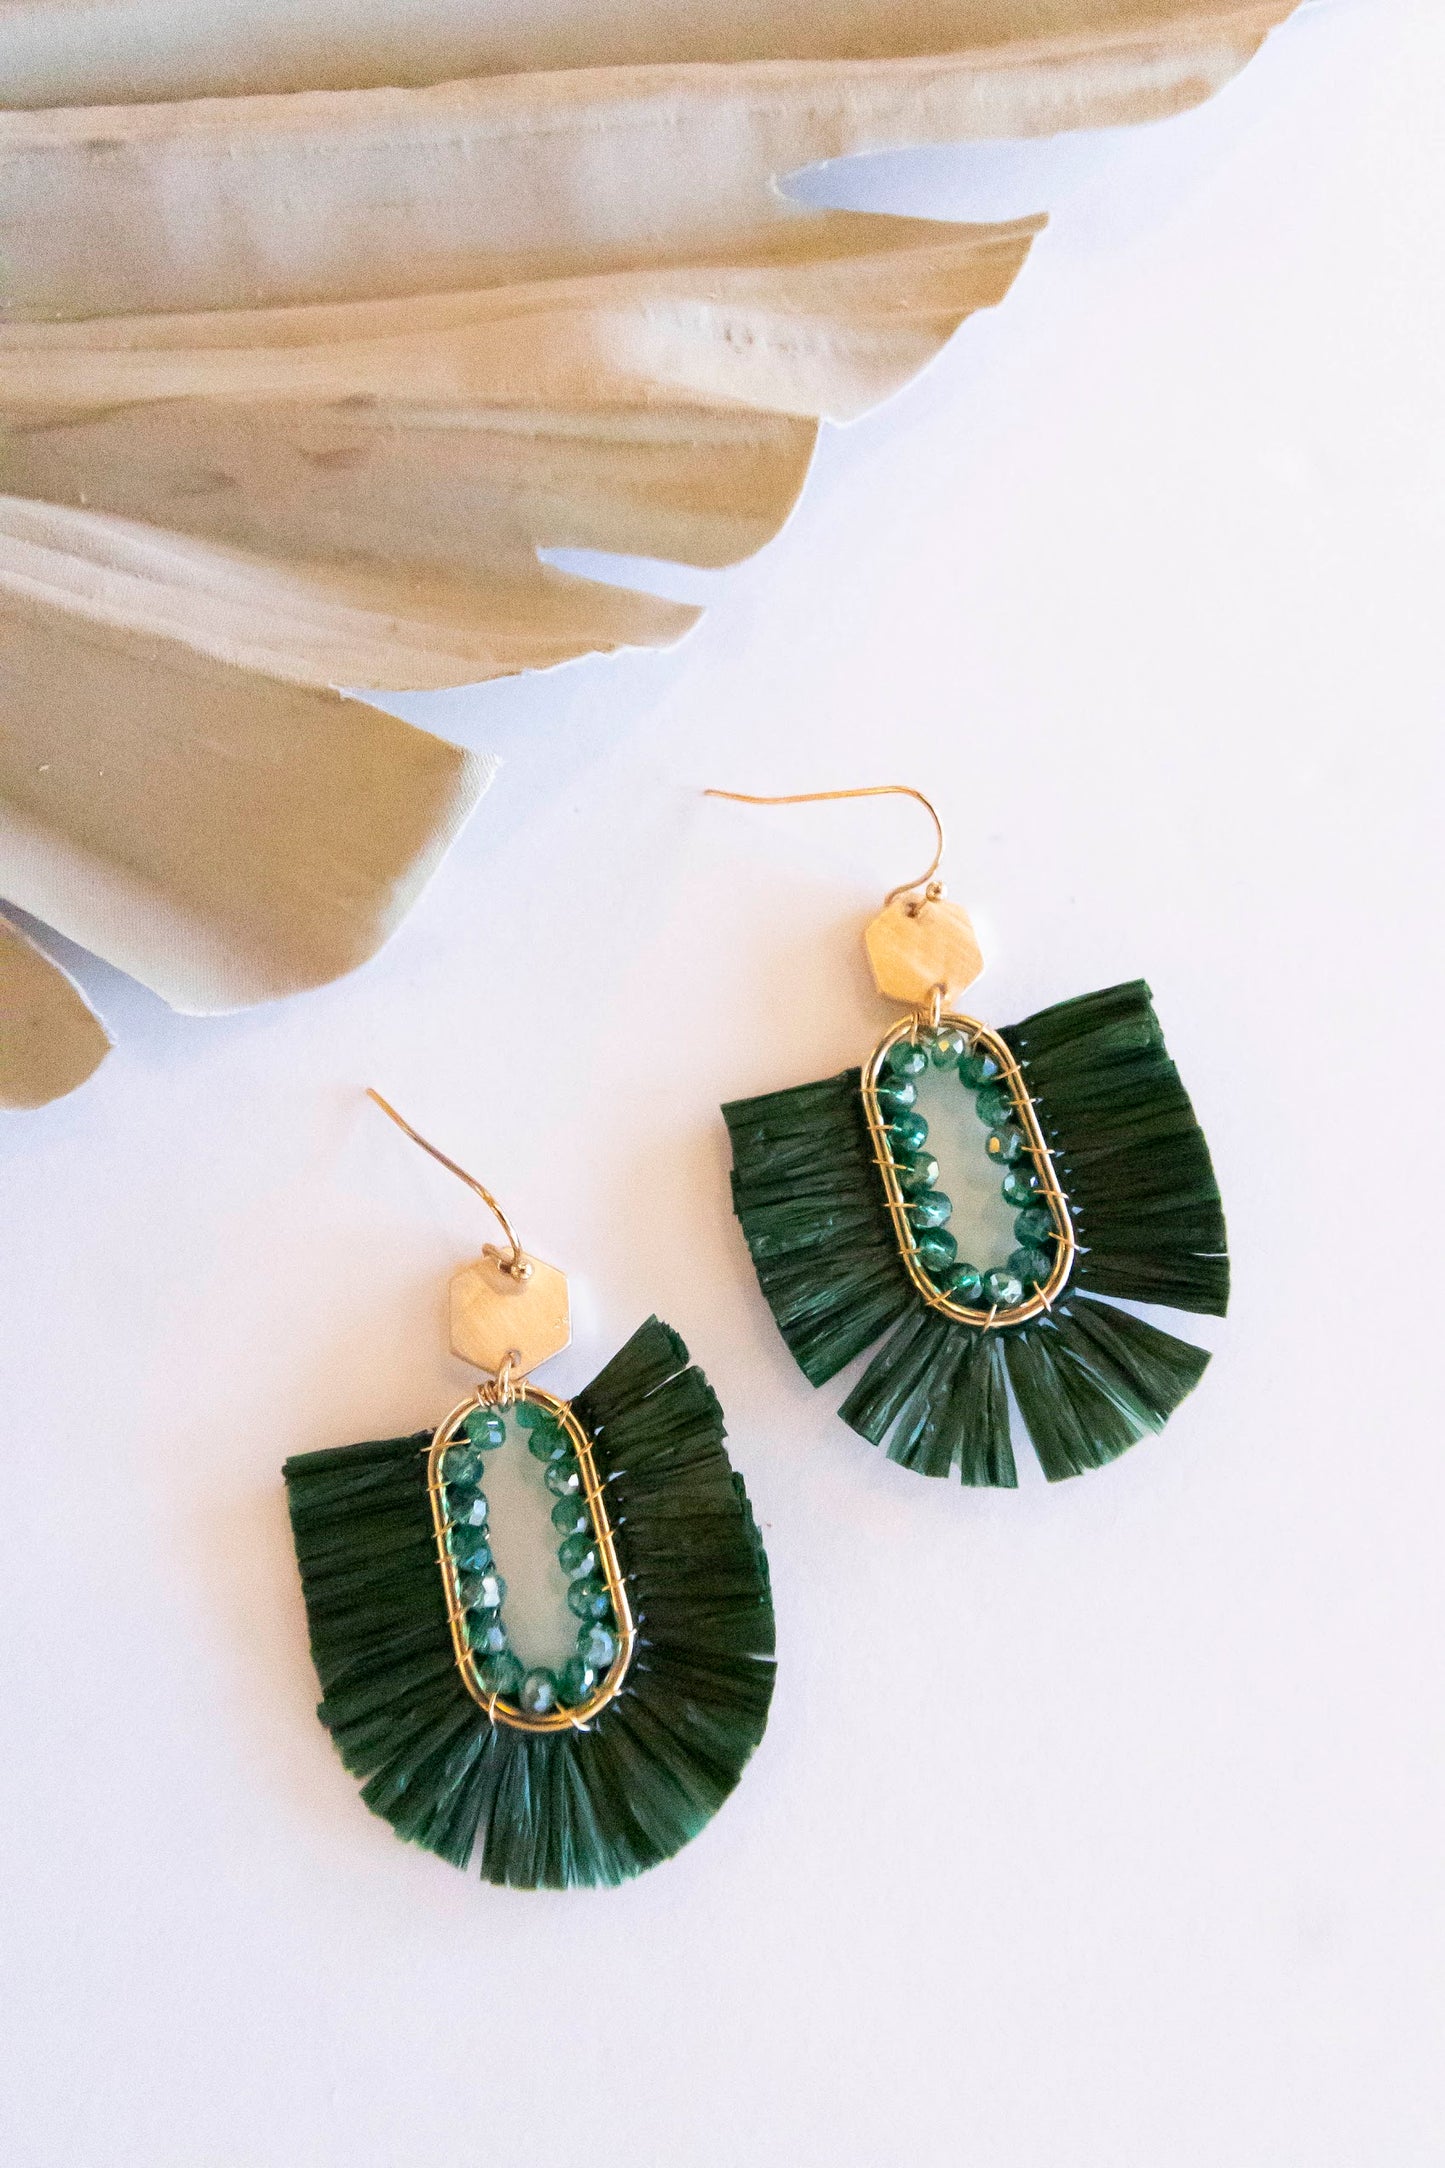 Sonia Crystal and Raffia Hoops | Oval Fan Design With Gold Details | Modern Autumn Earrings